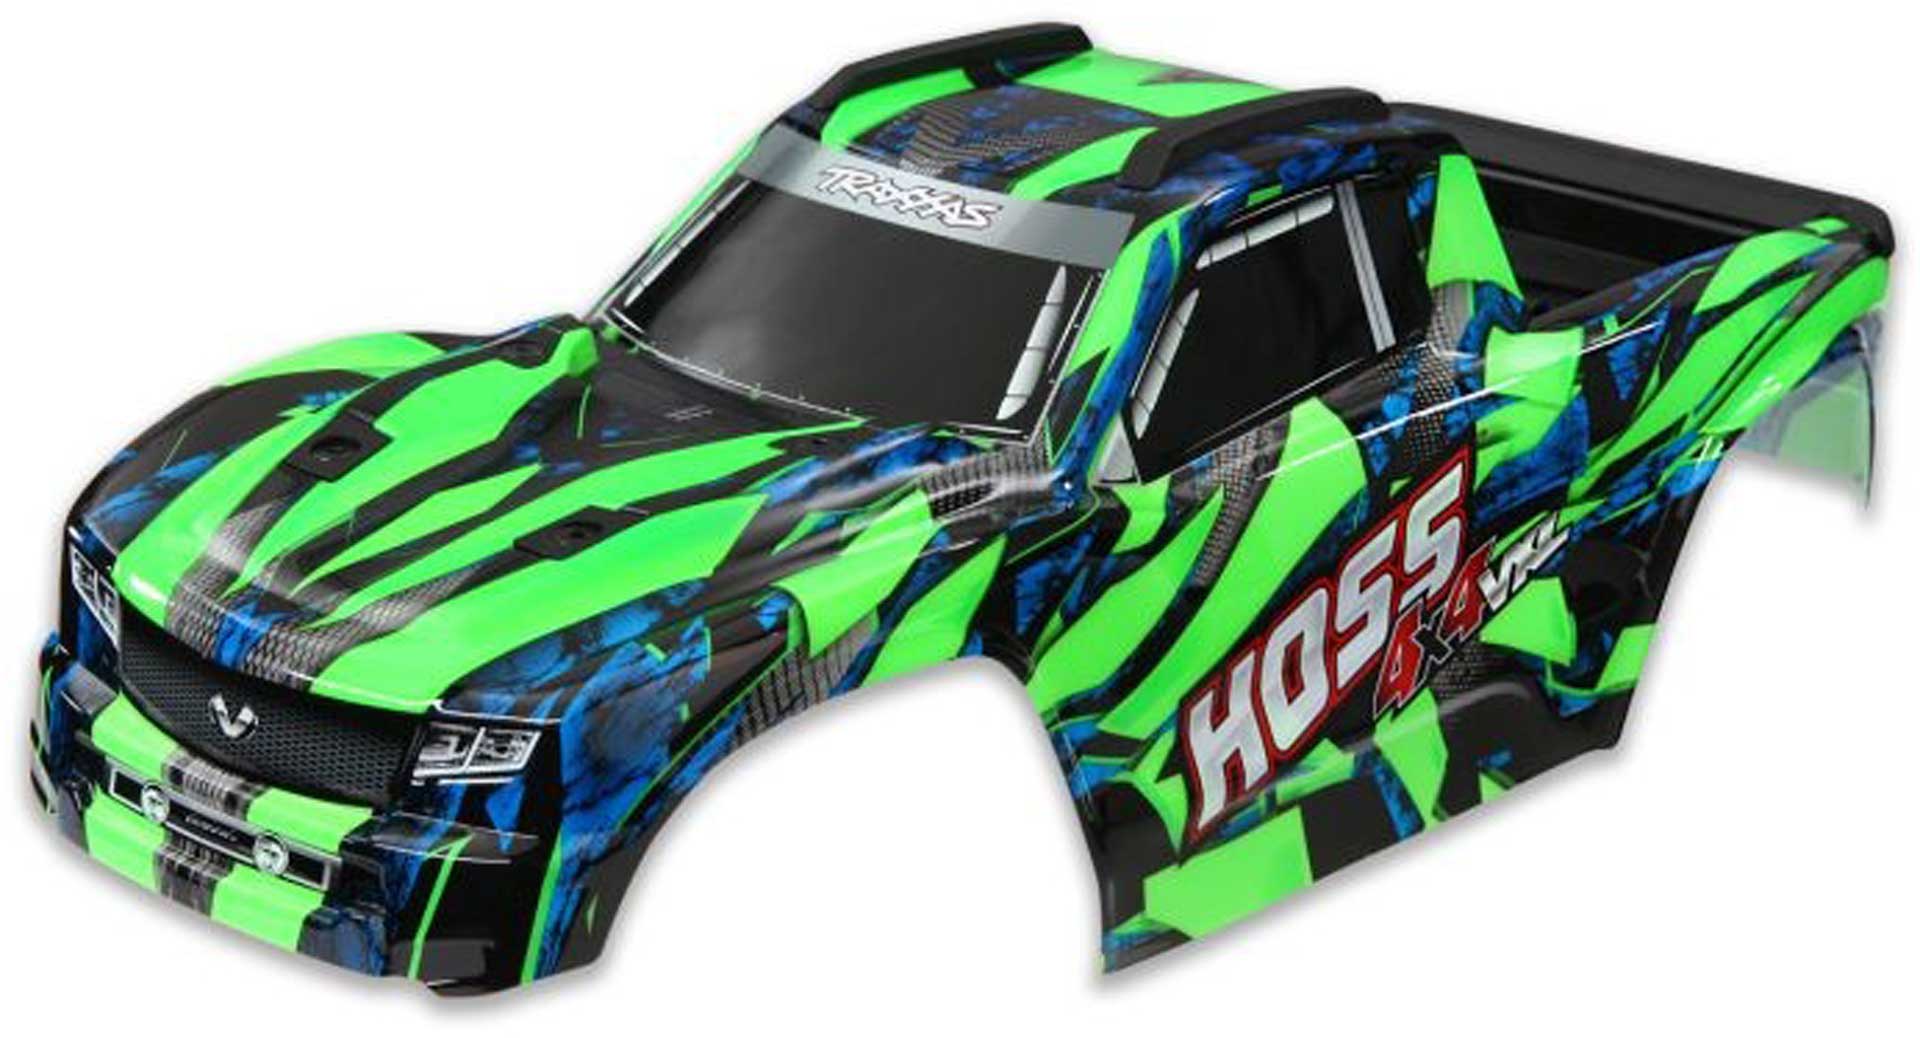 TRAXXAS Body Hoss 4x4 VXL green incl. stickers and bodyclips front and rear